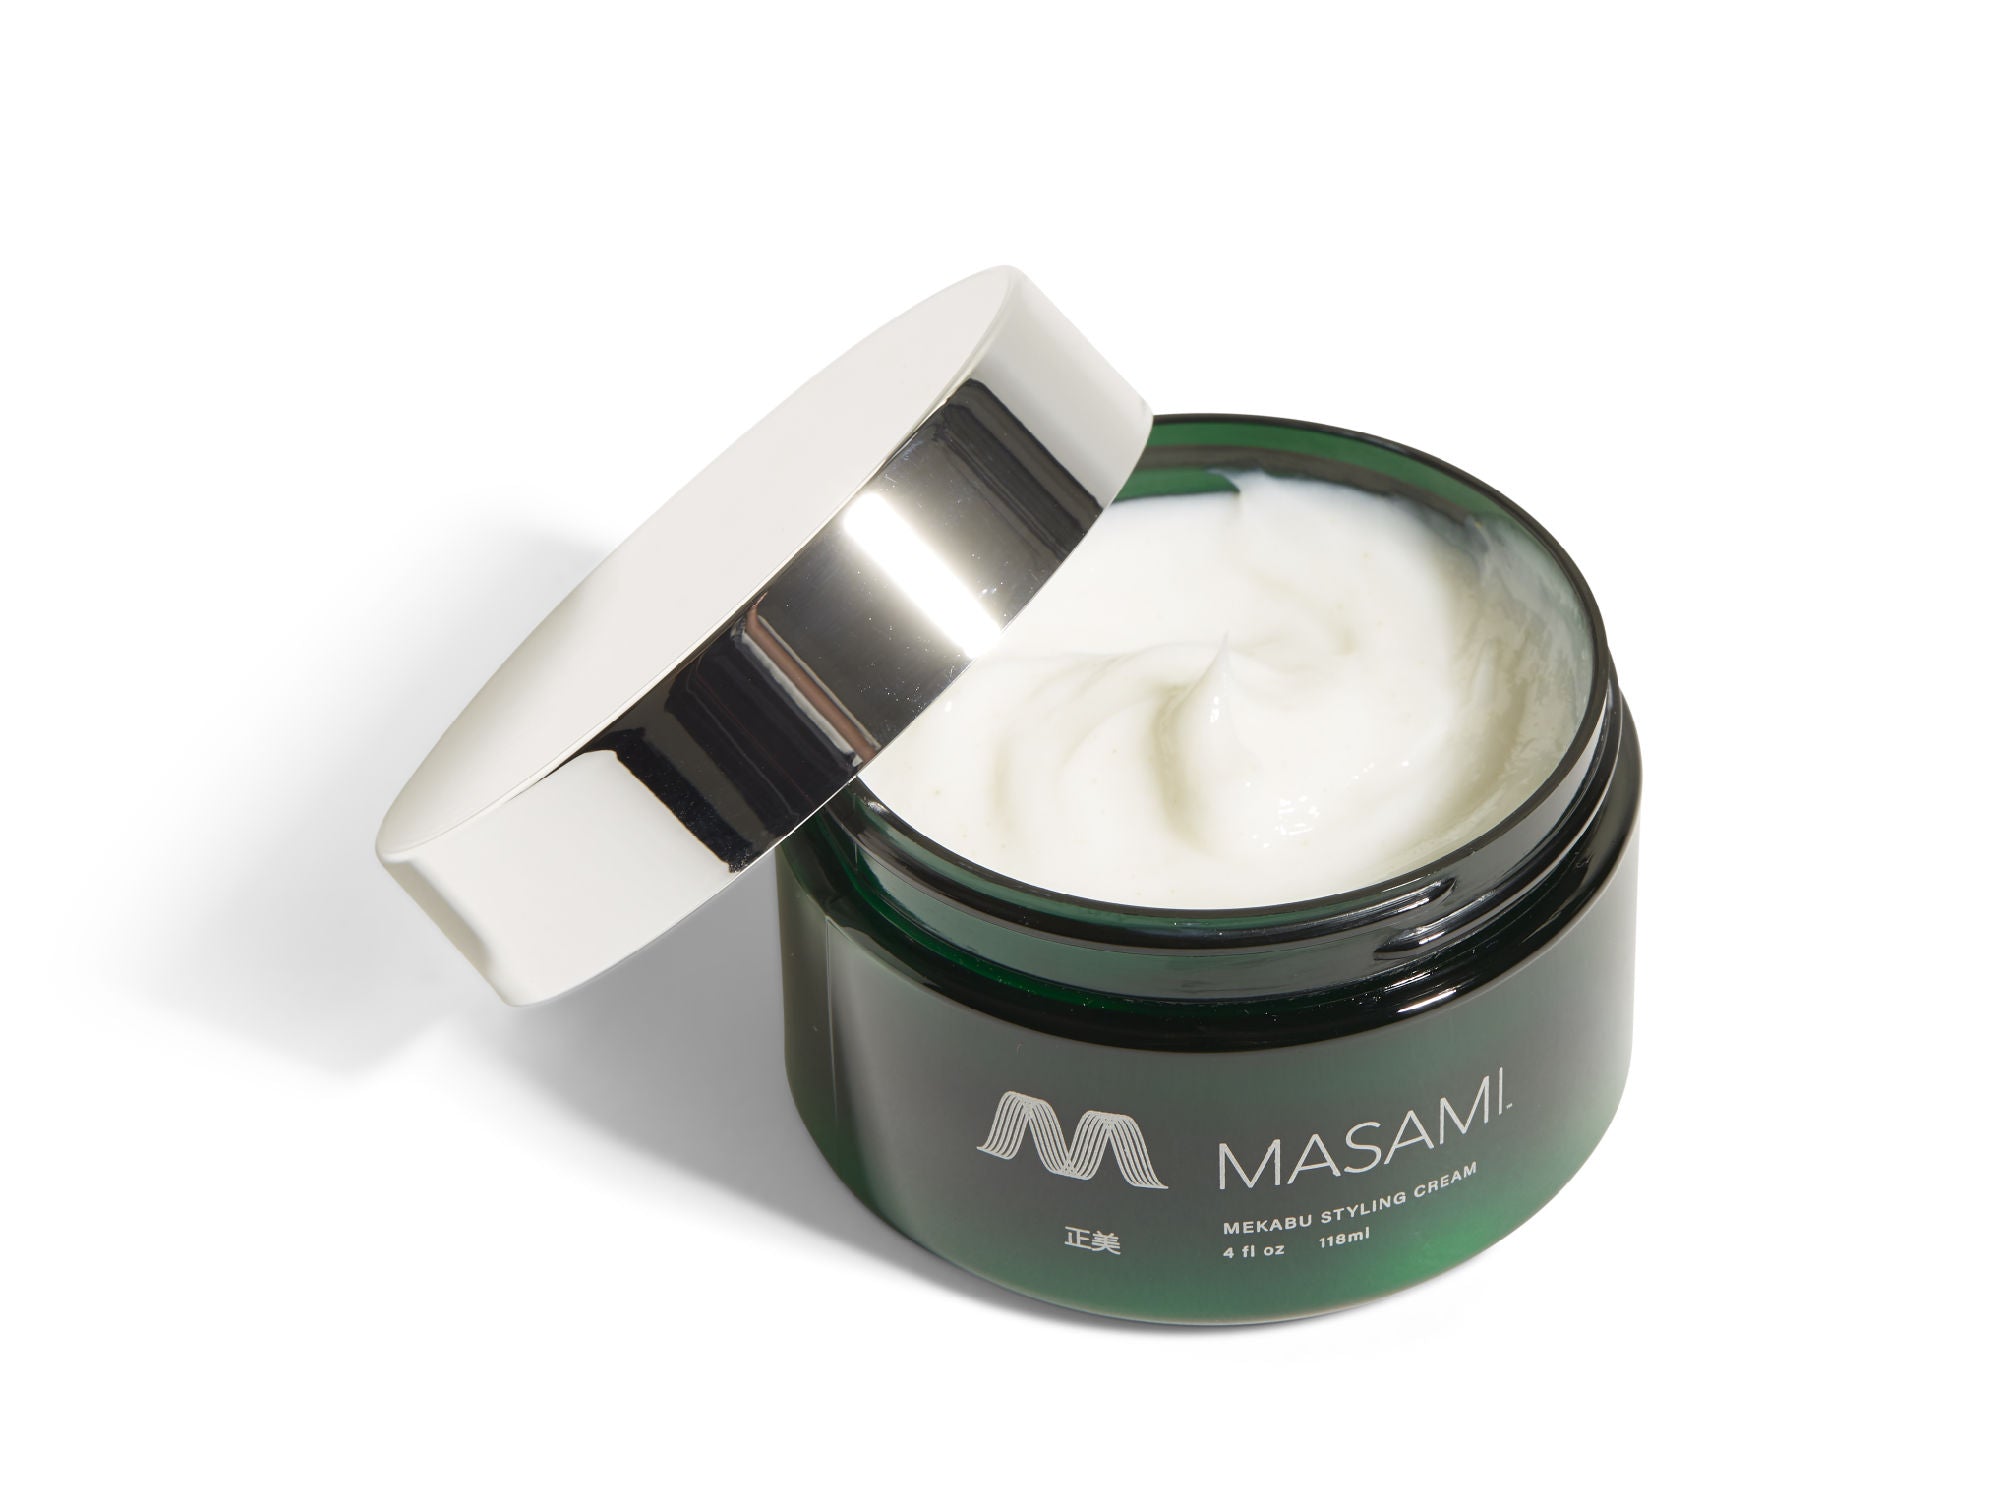 Container of MASAMI Mekabu Hydrating Styling Cream with a blue-green gradient design and silver lid, displaying the brand logo and product information. It is non-greasy.